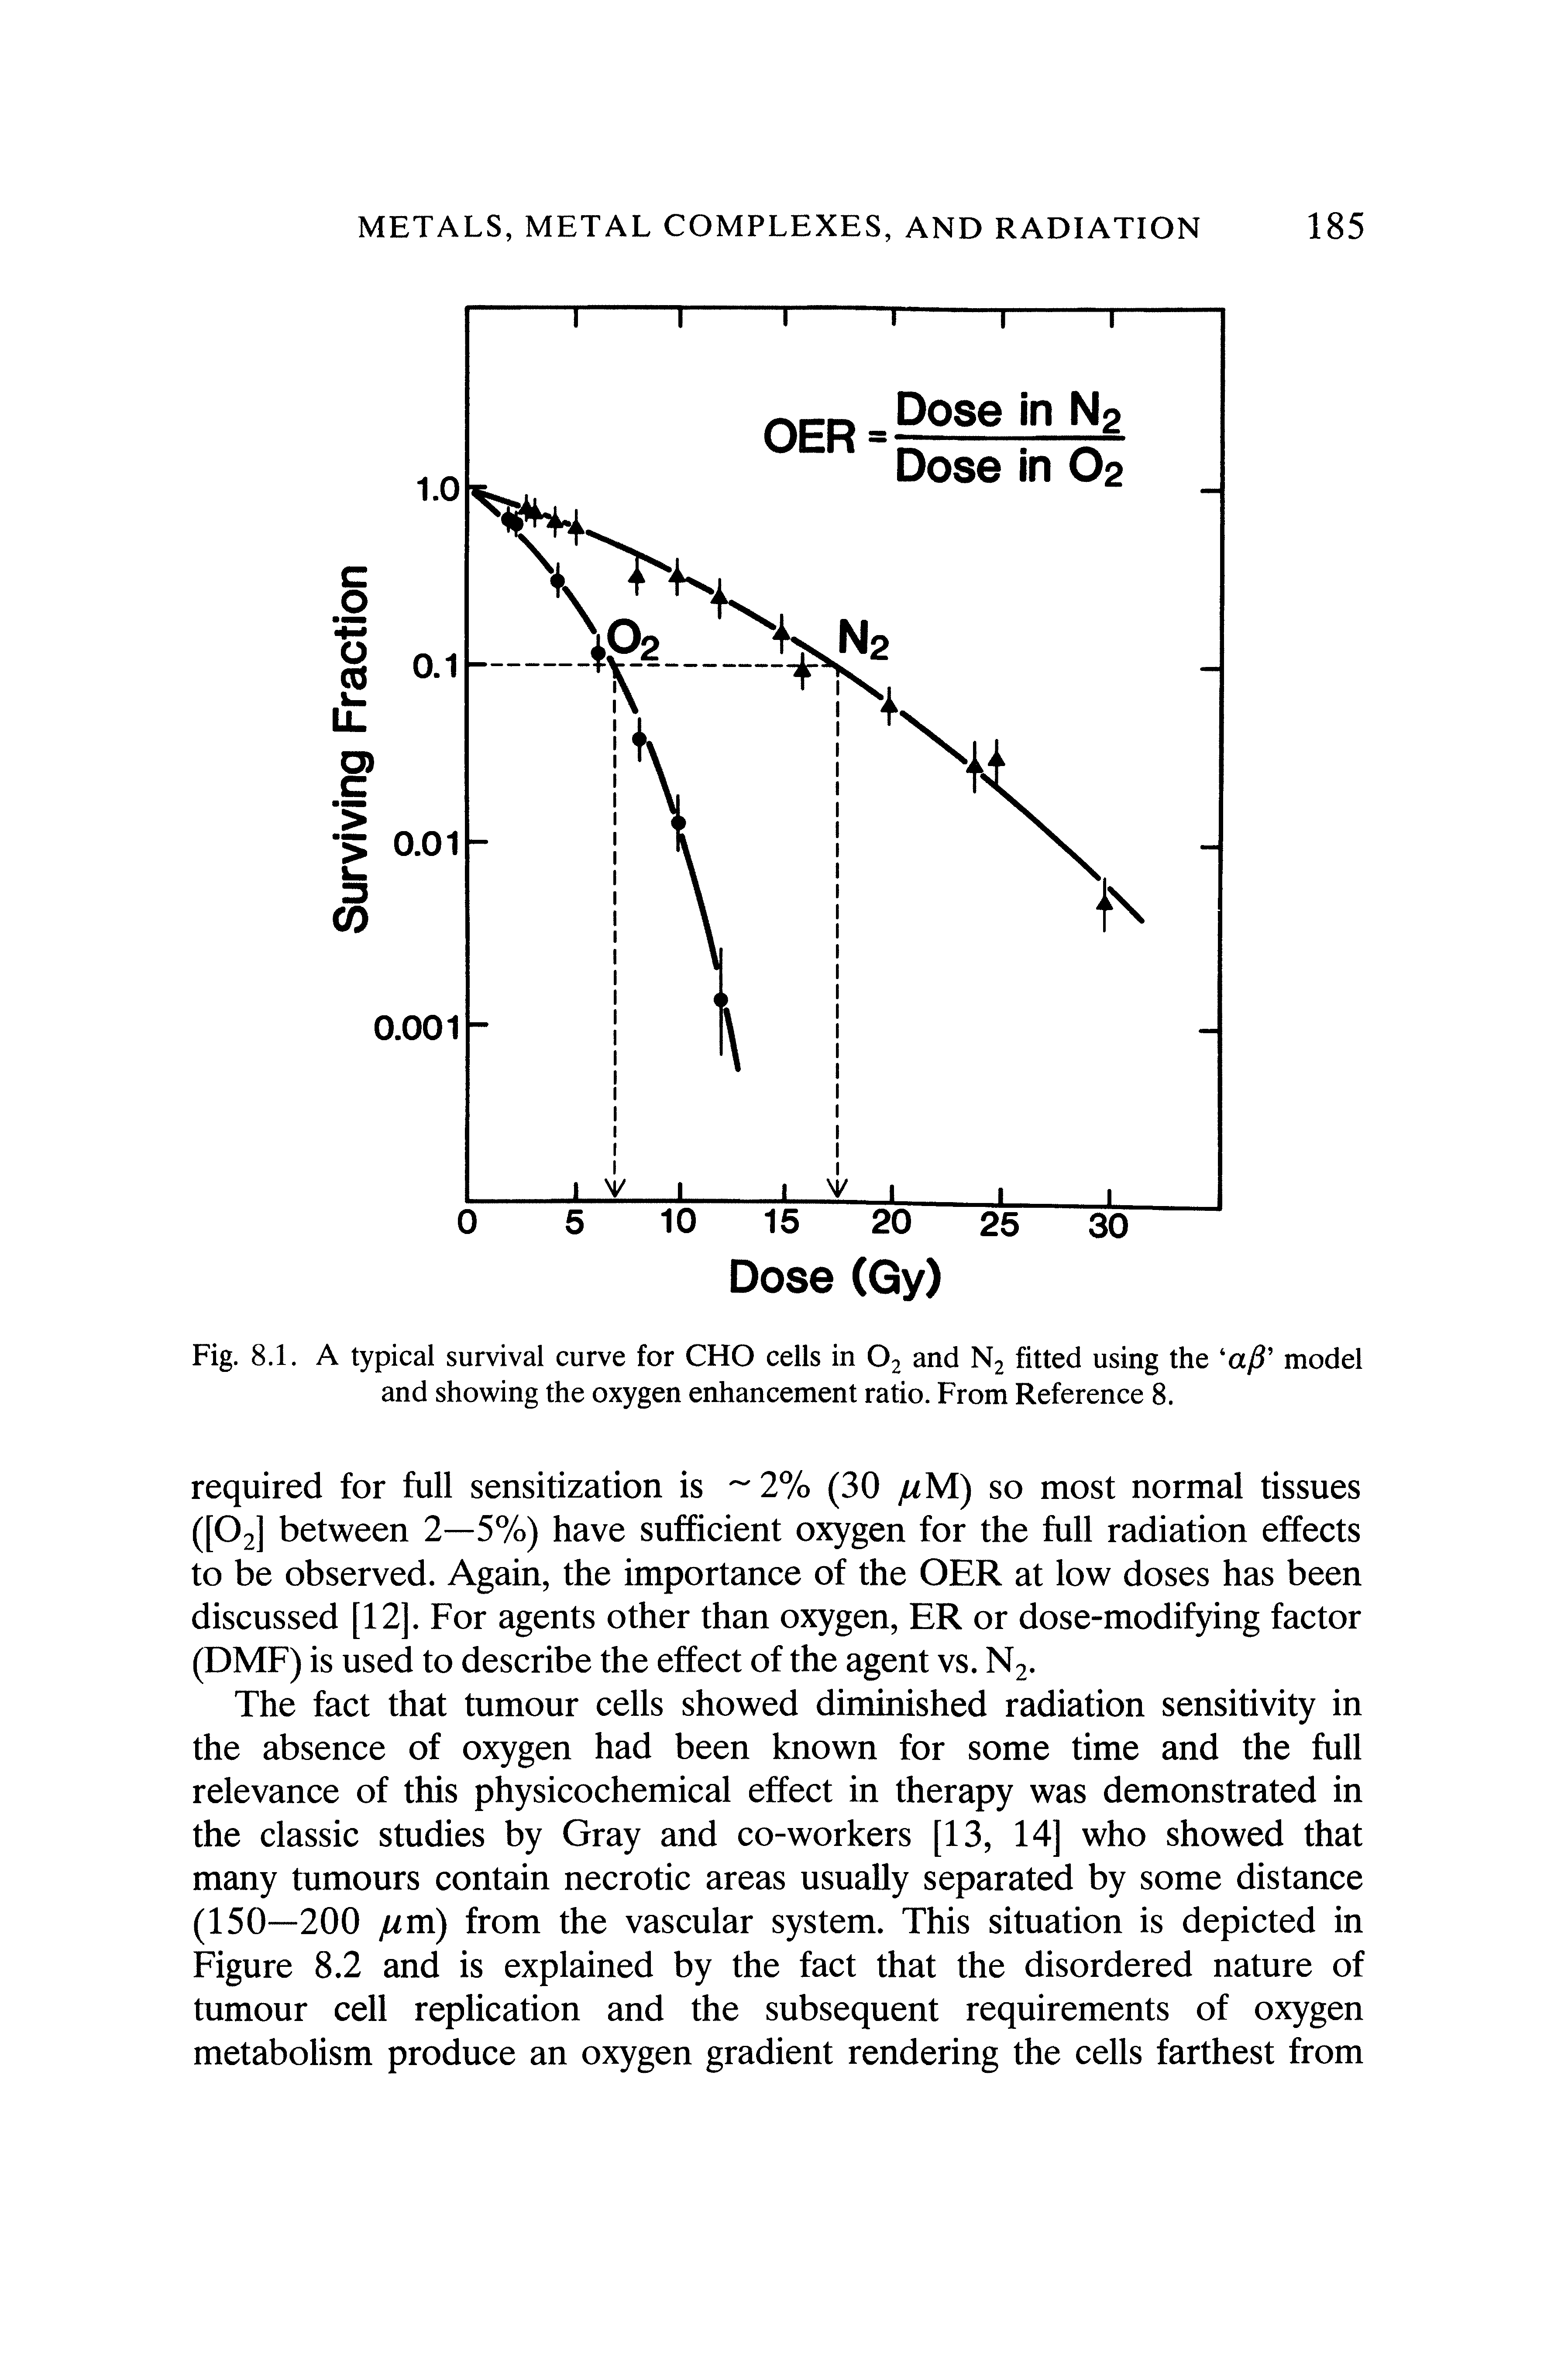 Fig. 8.1. A typical survival curve for CHO cells in O2 and N2 fitted using the a model and showing the oxygen enhancement ratio. From Reference 8.